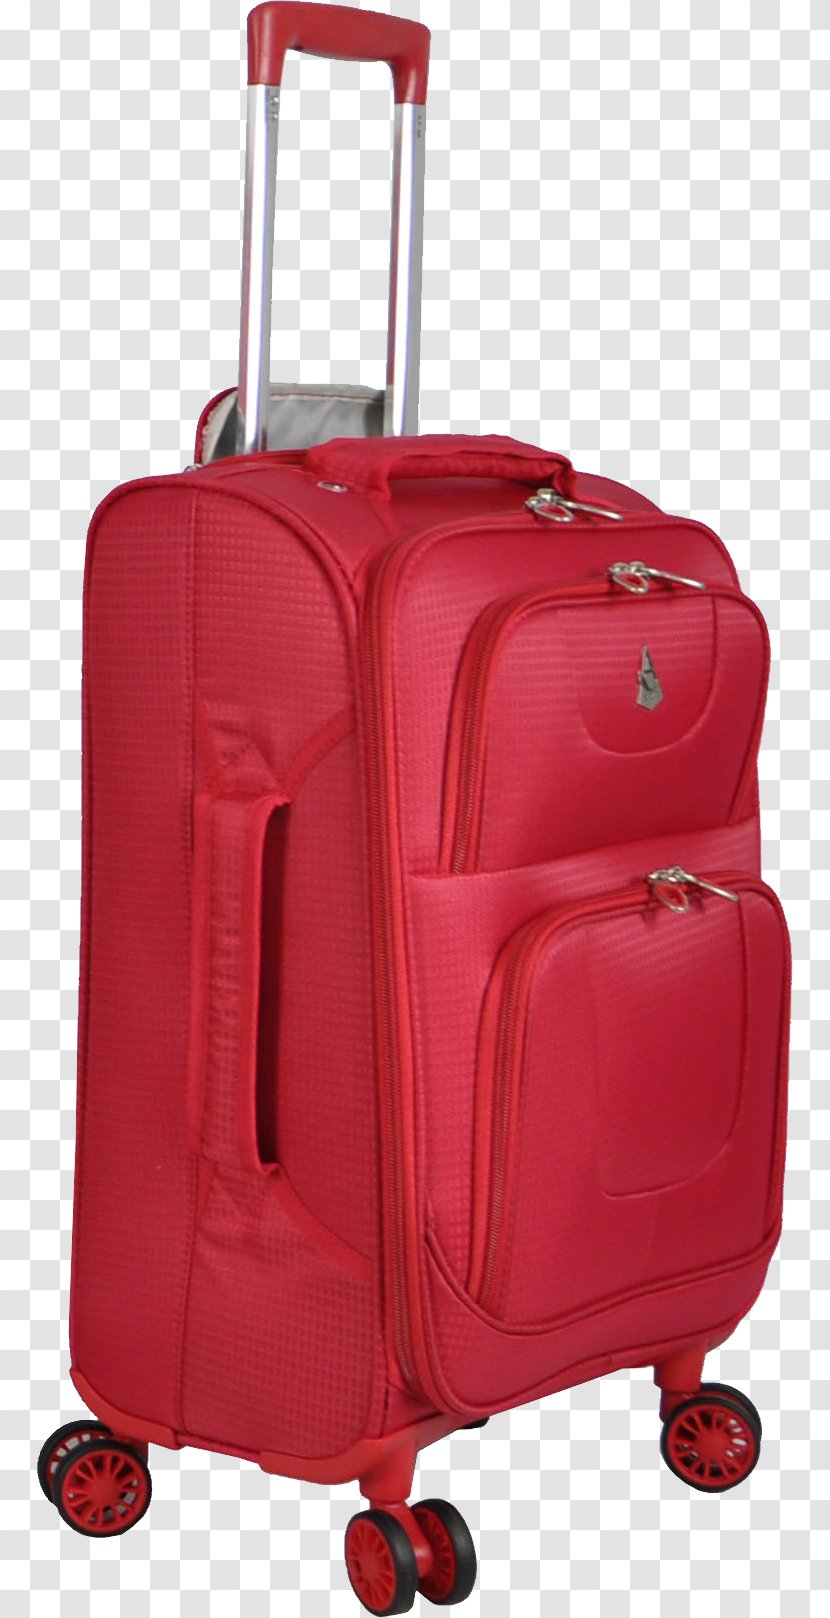 Baggage Suitcase Hand Luggage - Red - Pink Image Transparent PNG